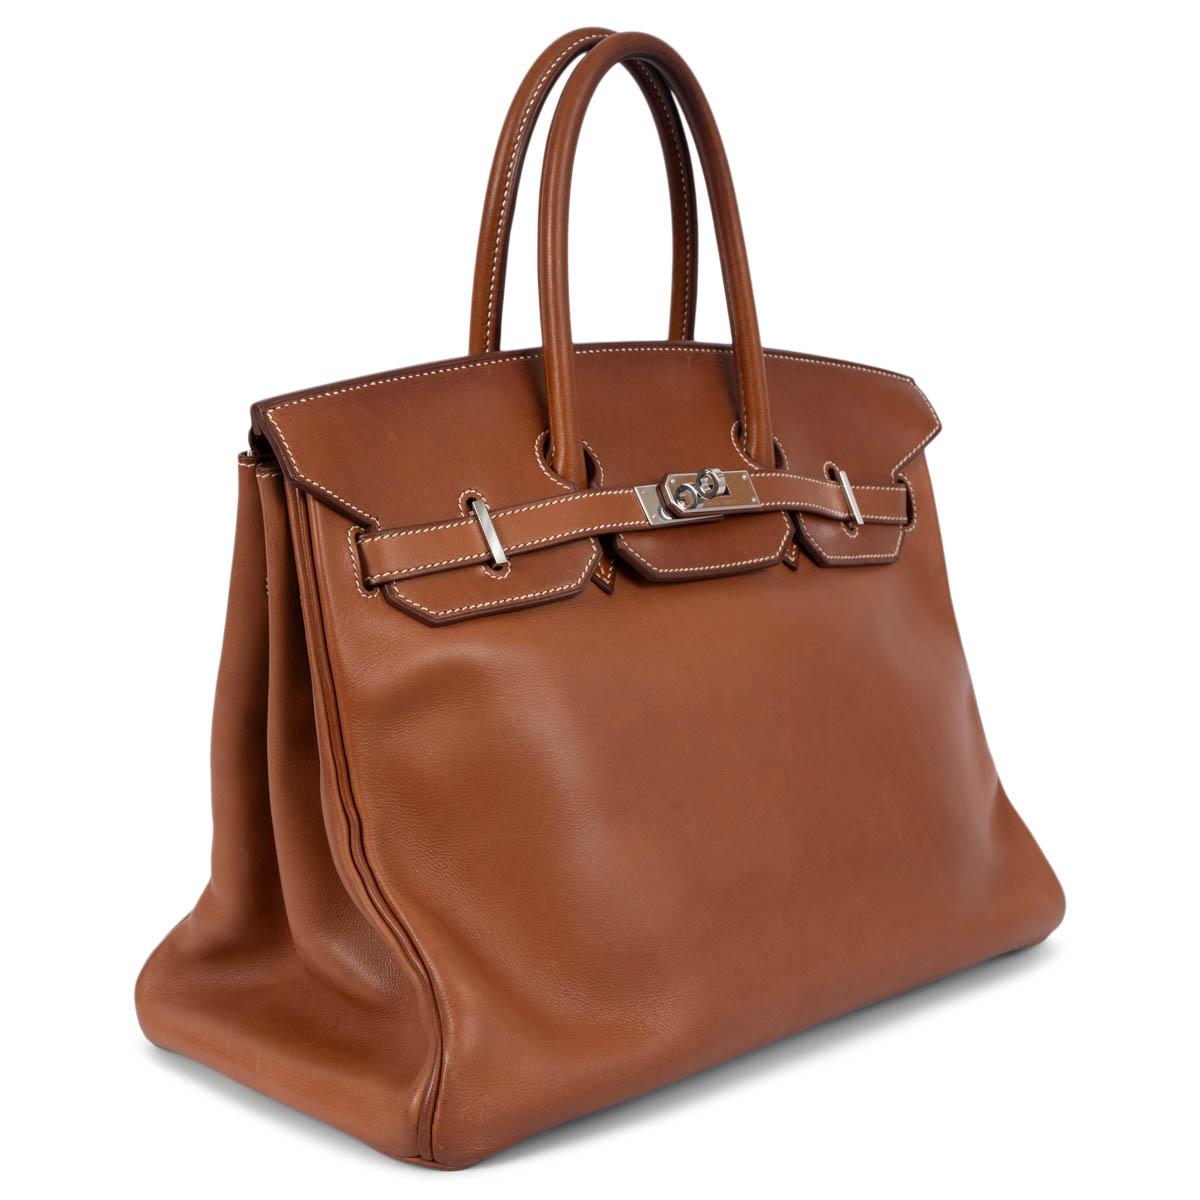 100% authentic Hermès Birkin 35 bag in Fauve (cognac brown) Veau Barenia leather with Palladium hardware. Lined in Chevre (goat skin) with an open pocket against the front and zipper pocket against the back. Has been carried and shows some natural